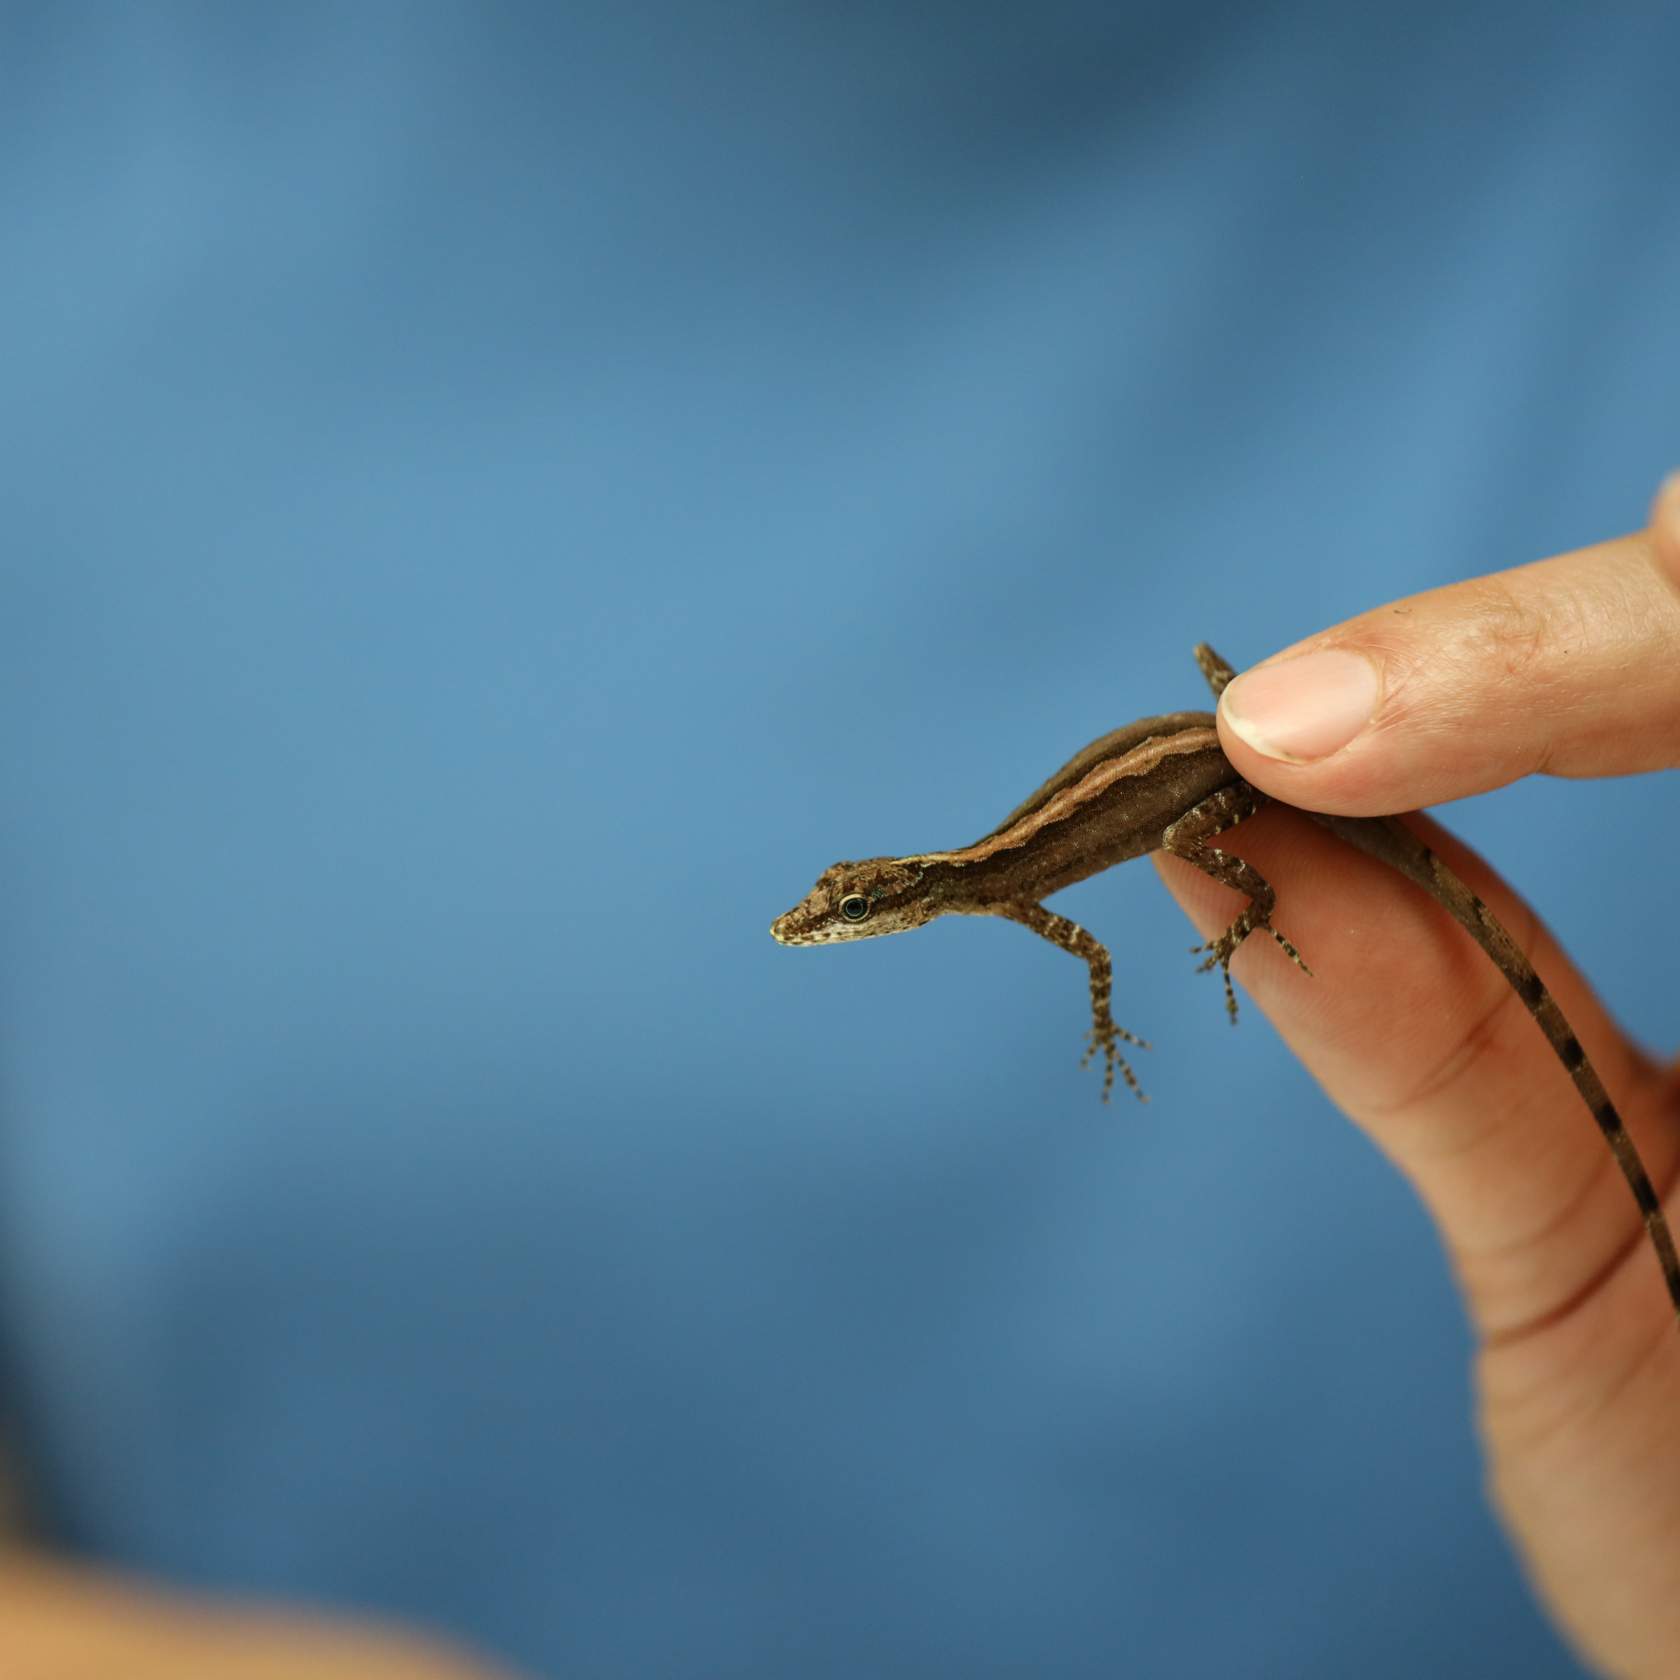 a researcher gently holds a small lizard